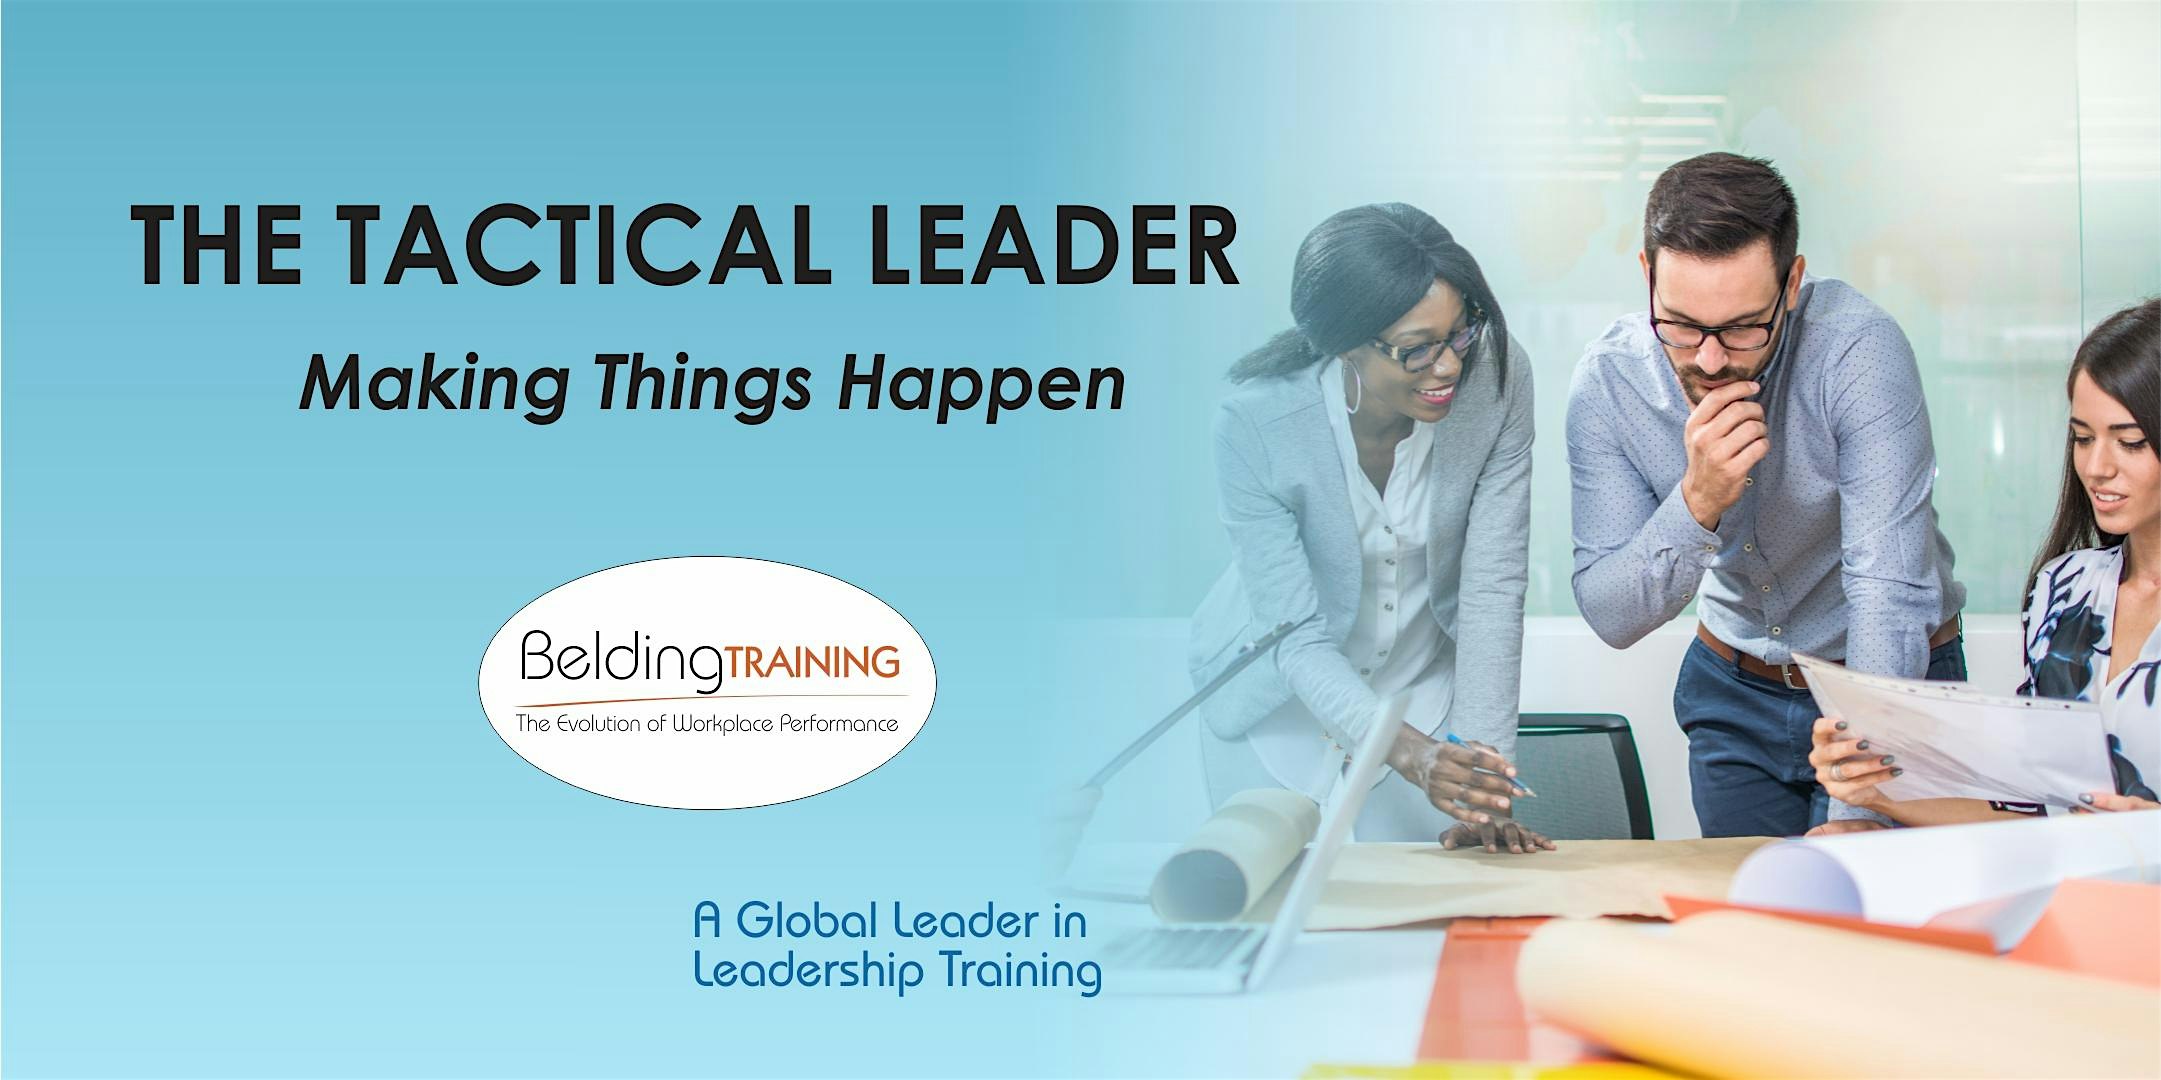 THE TACTICAL LEADER – Making Things Happen